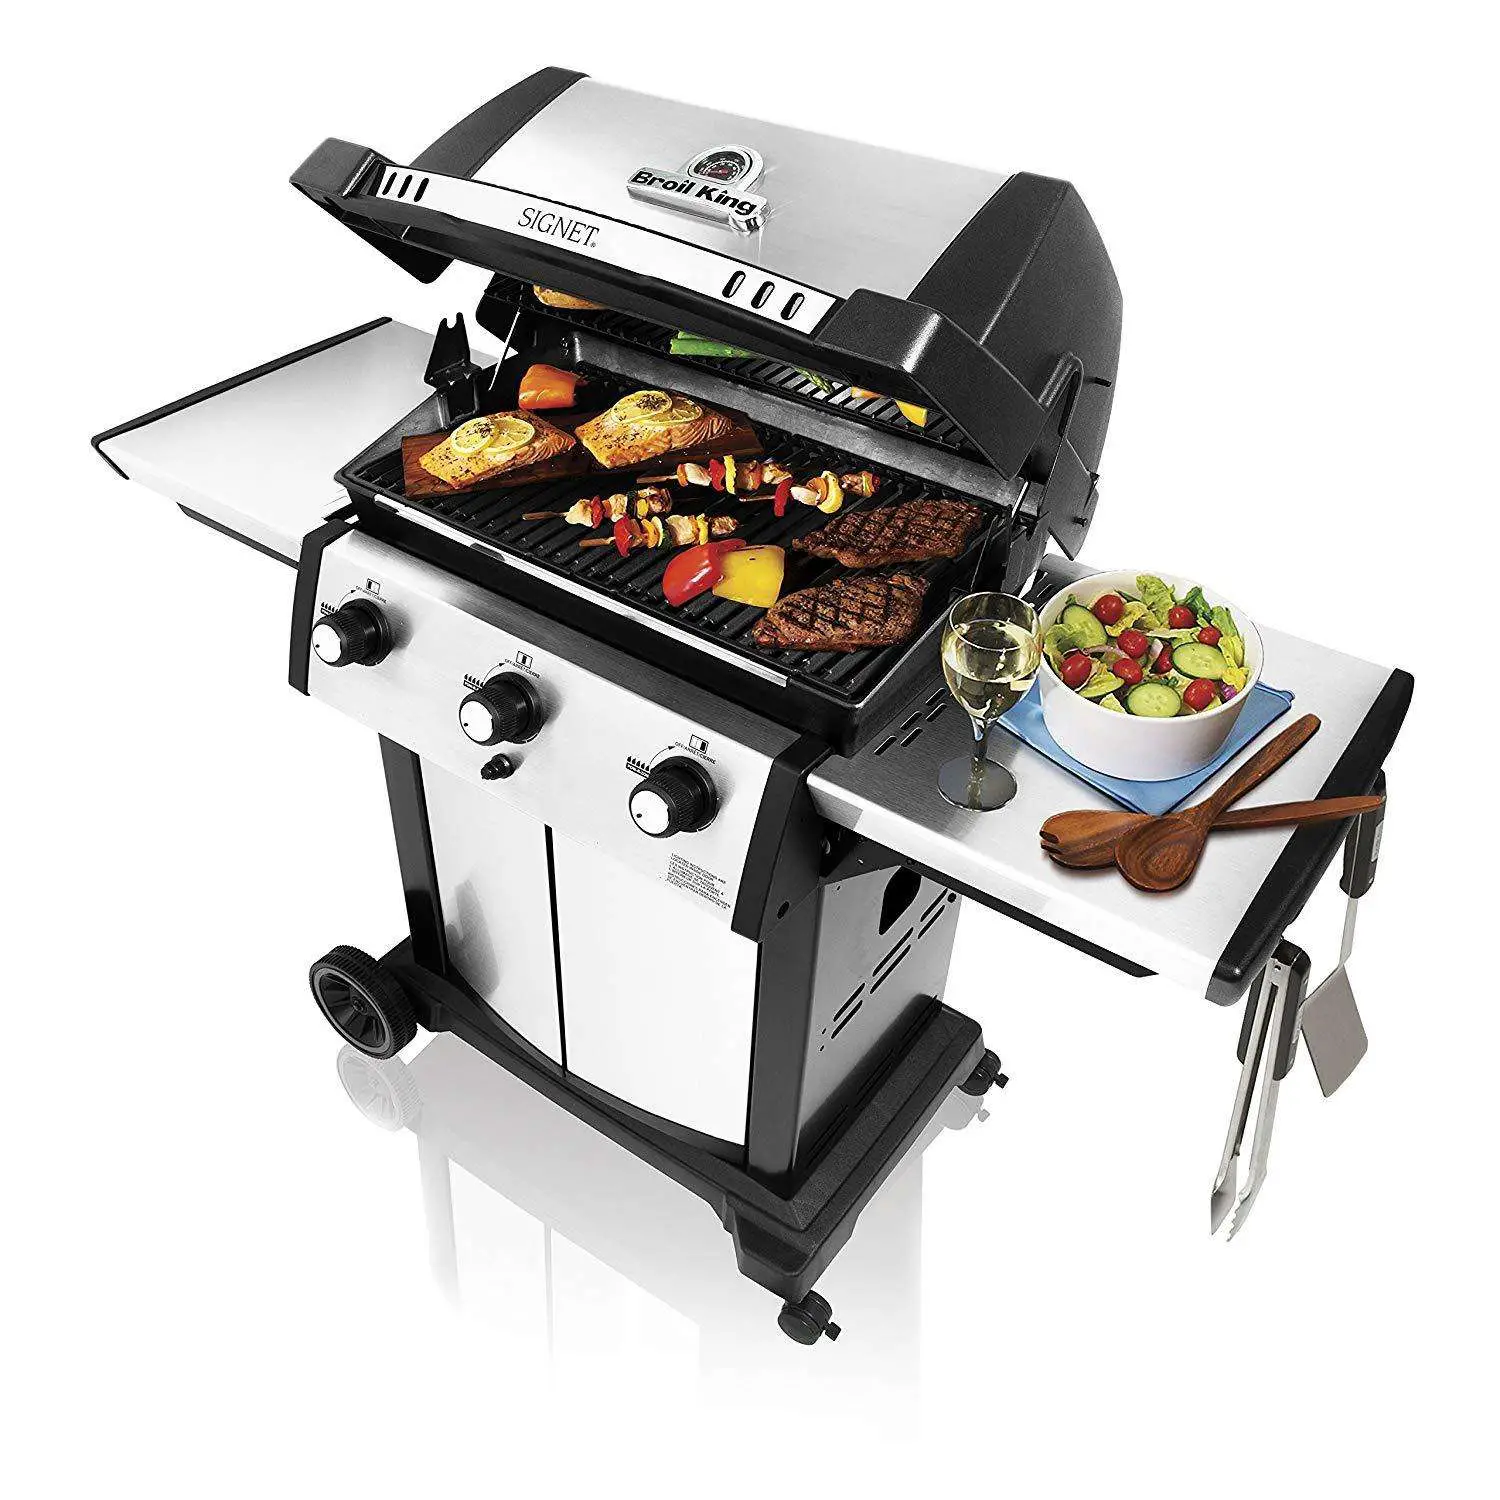 Broil King Signet 320 Review